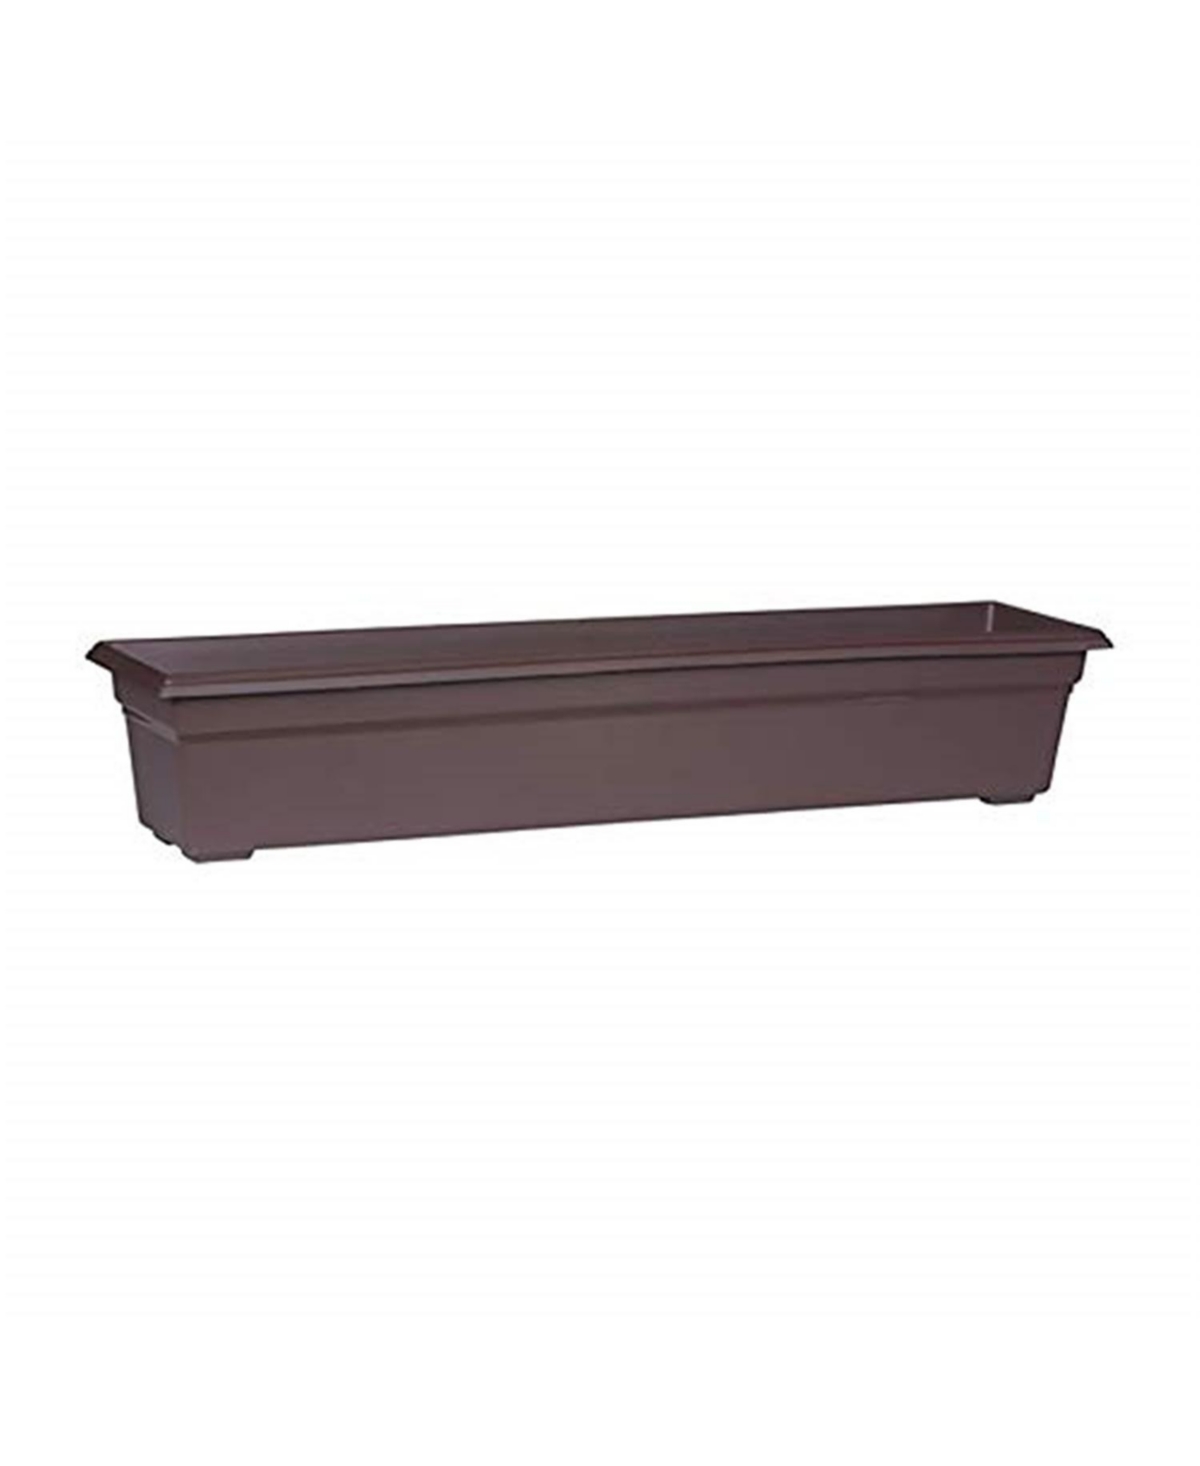 Countryside Flower Box, Brown, 36 Inch - Brown